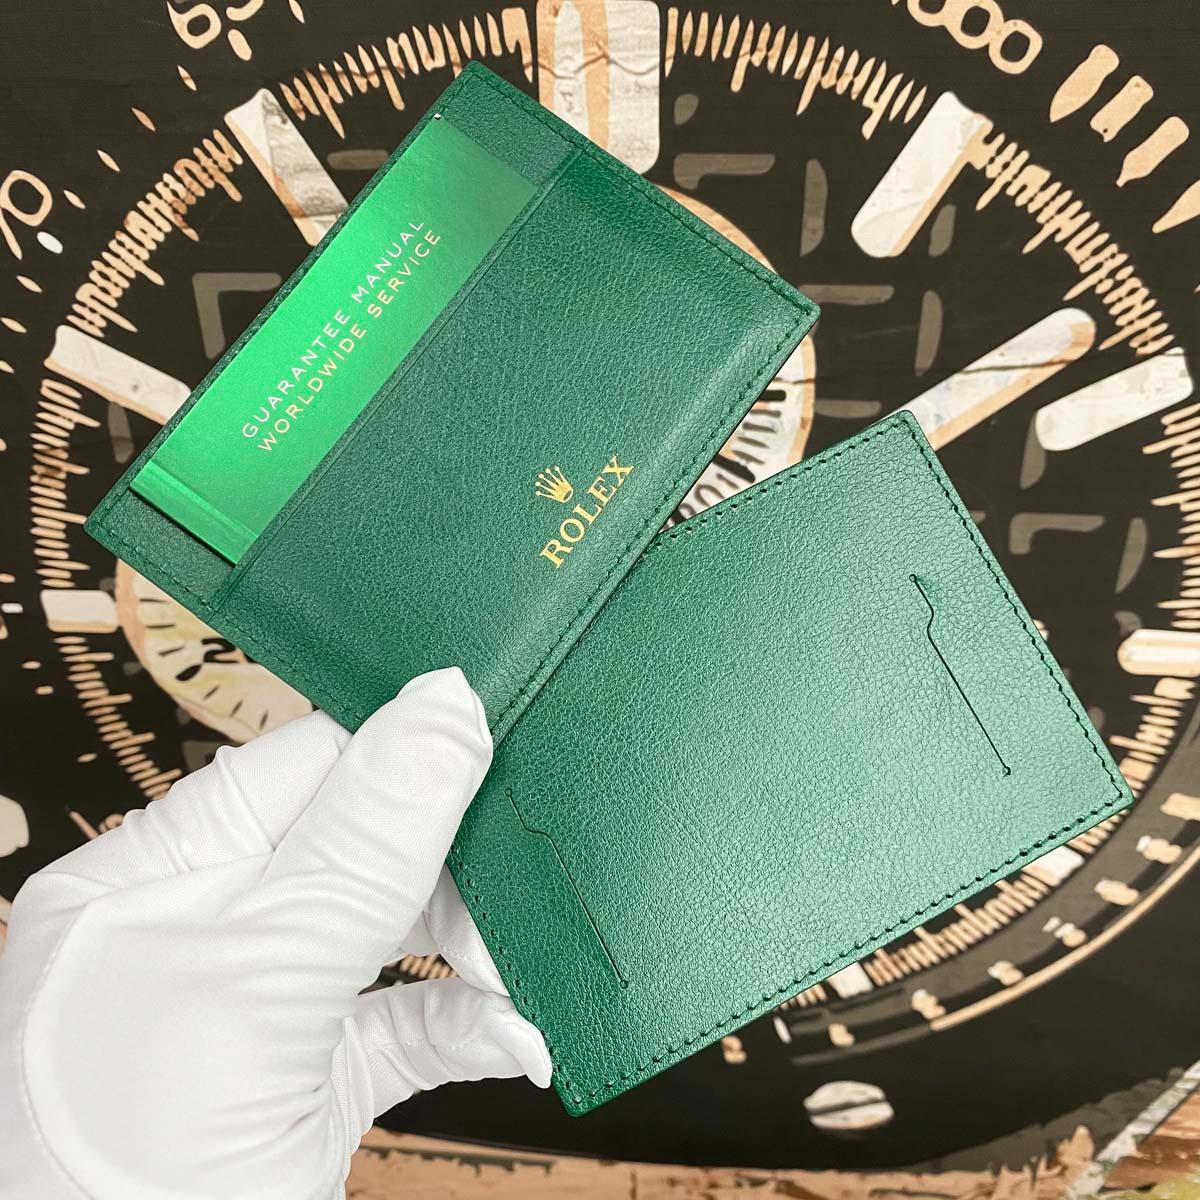 Rolex Manuals and Wallet Set - All Models Available - Gotham Trading 